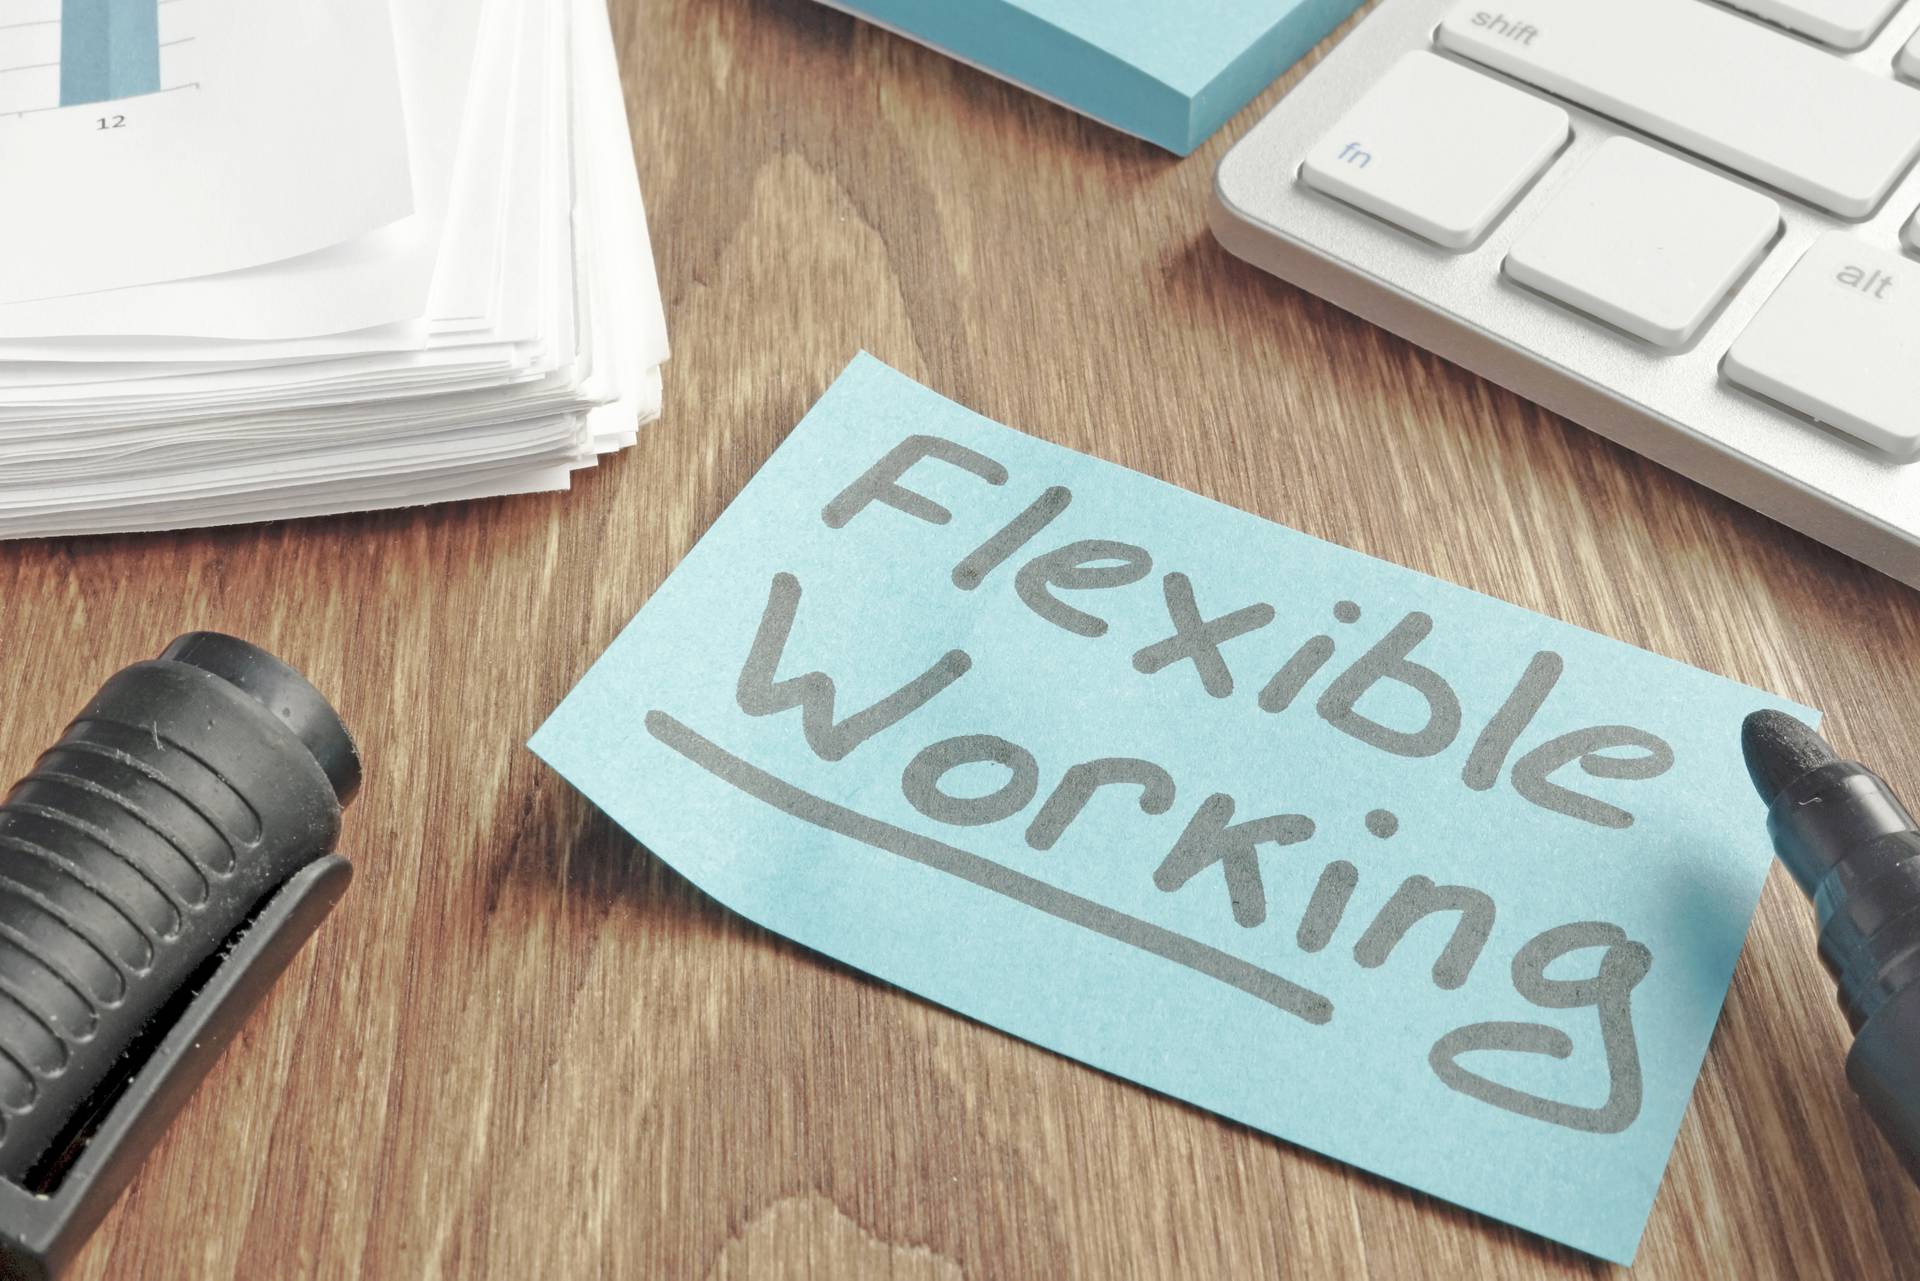 Flexible working to improve productivity